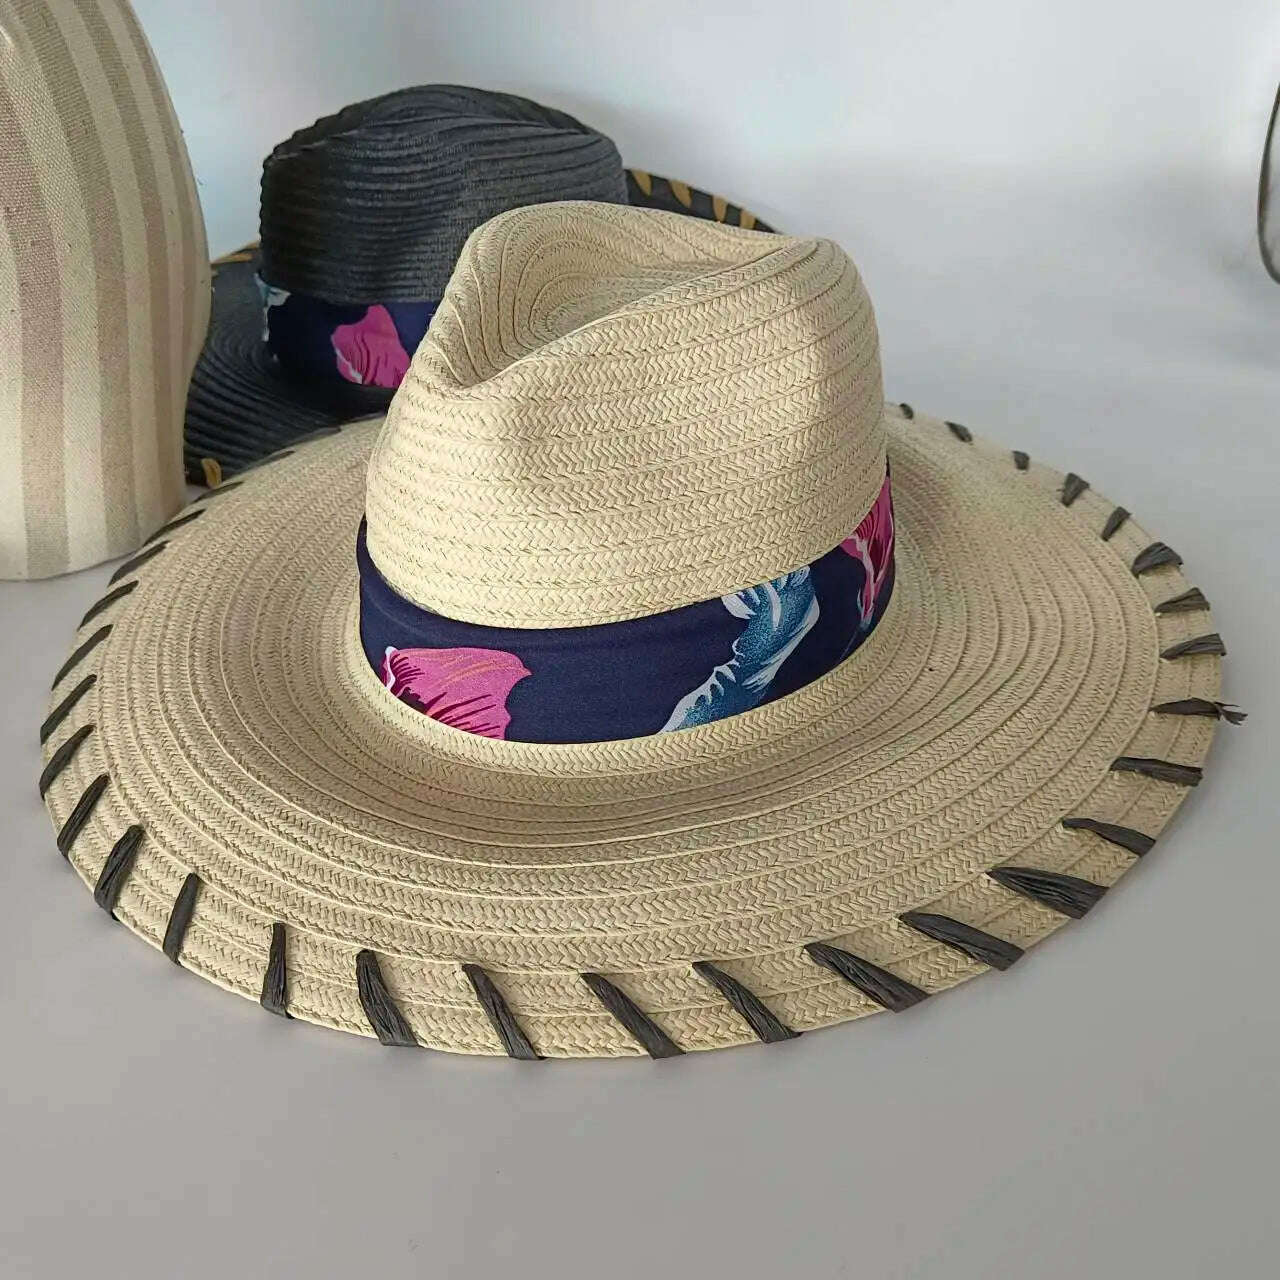 KIMLUD, women straw hat  Flat Top Straw Hat Vacation Casual Shopping Beach Hats for Woman Hats for girls Church Courtesy Panama Sun Hat, 37 / M 56-58CM, KIMLUD Womens Clothes